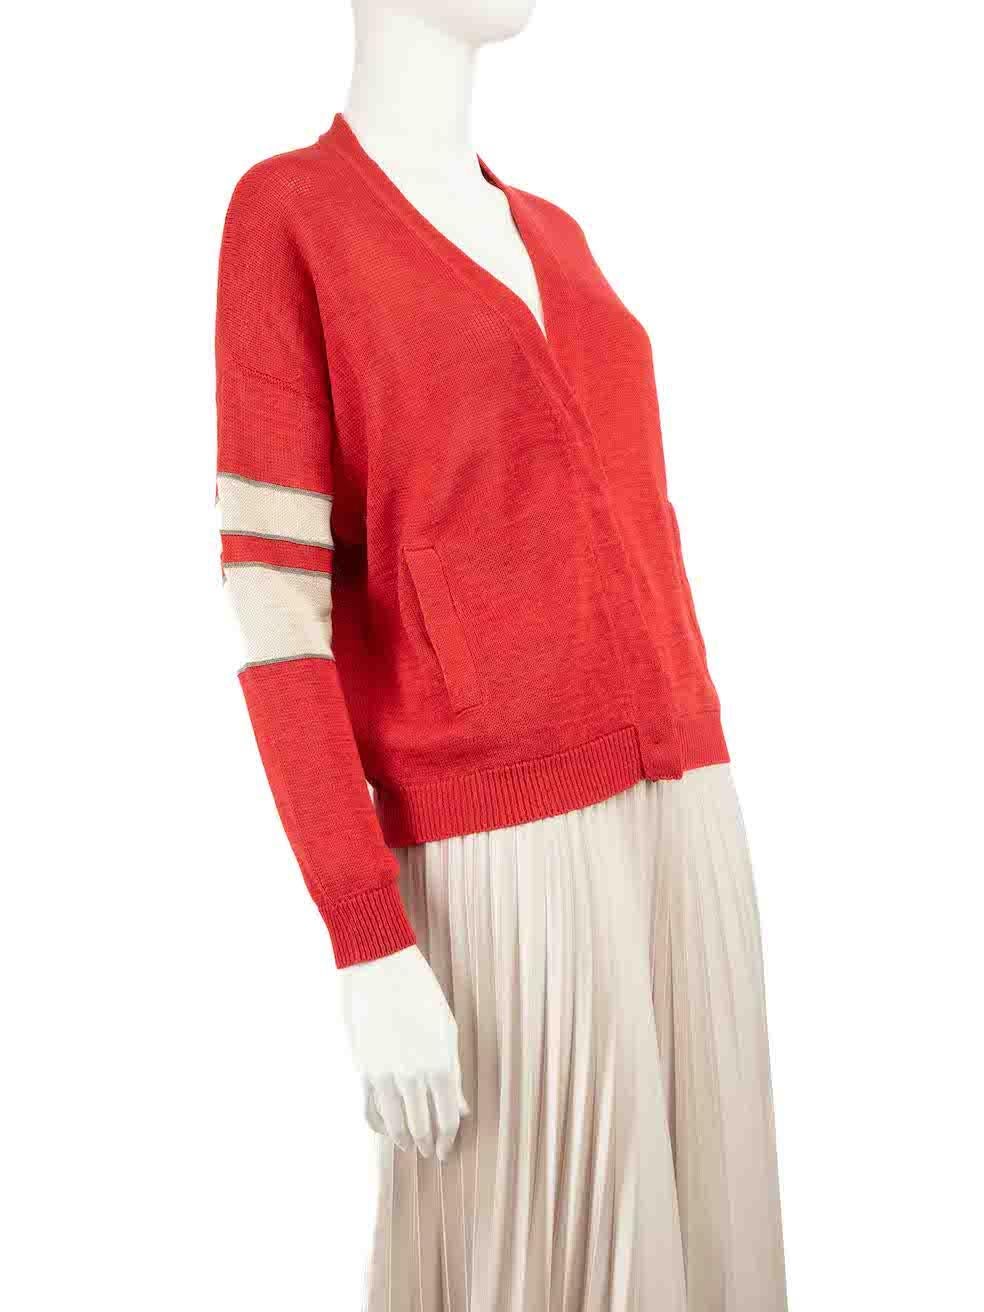 CONDITION is Very good. Hardly any visible wear to cardigan is evident on this used Brunello Cucinelli designer resale item.
 
 Details
 Red
 Cotton
 Knit cardigan
 Sleeve beige stripe detail
 Beaded embellished
 Snap button fastening
 V-neck
 2x